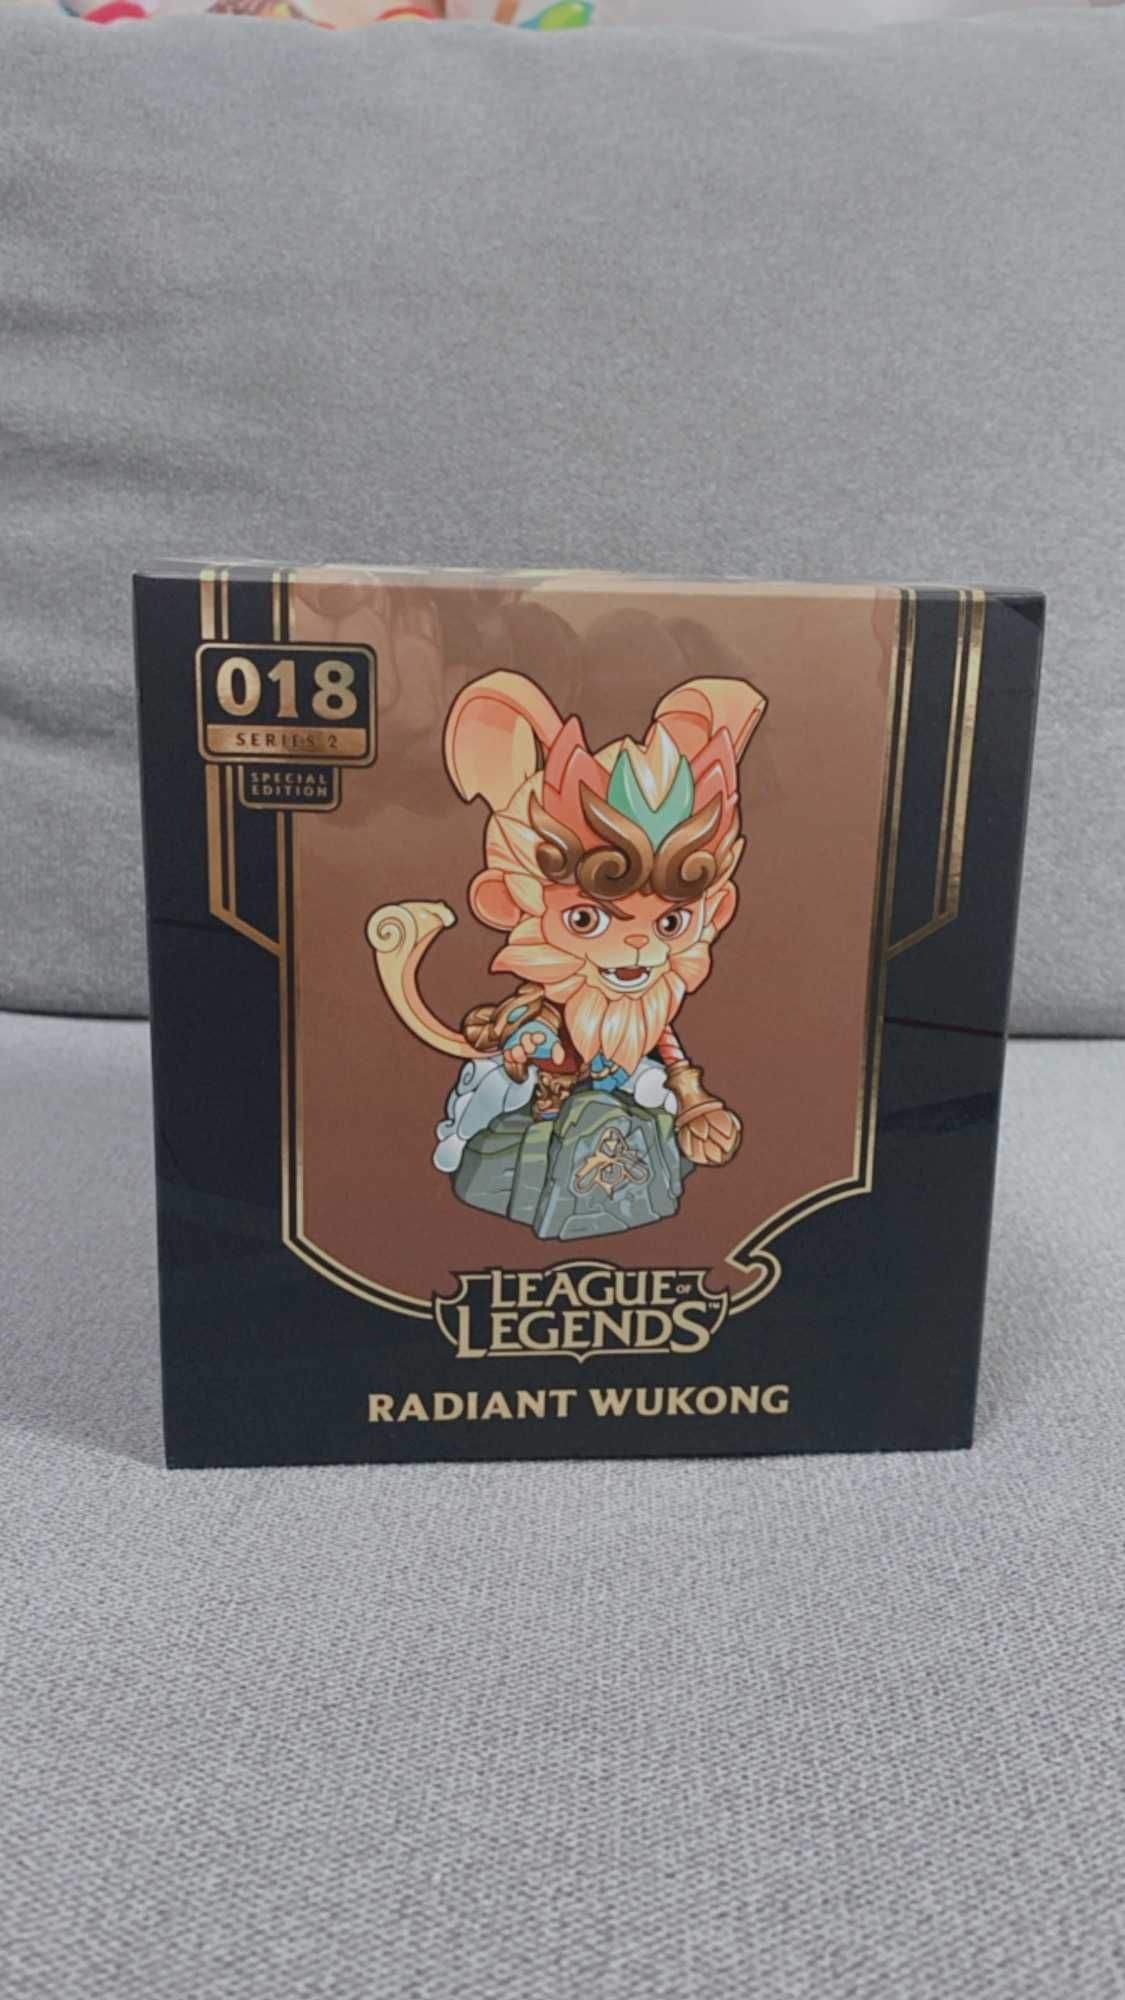 Figurka Radiant Wukong Riot Games